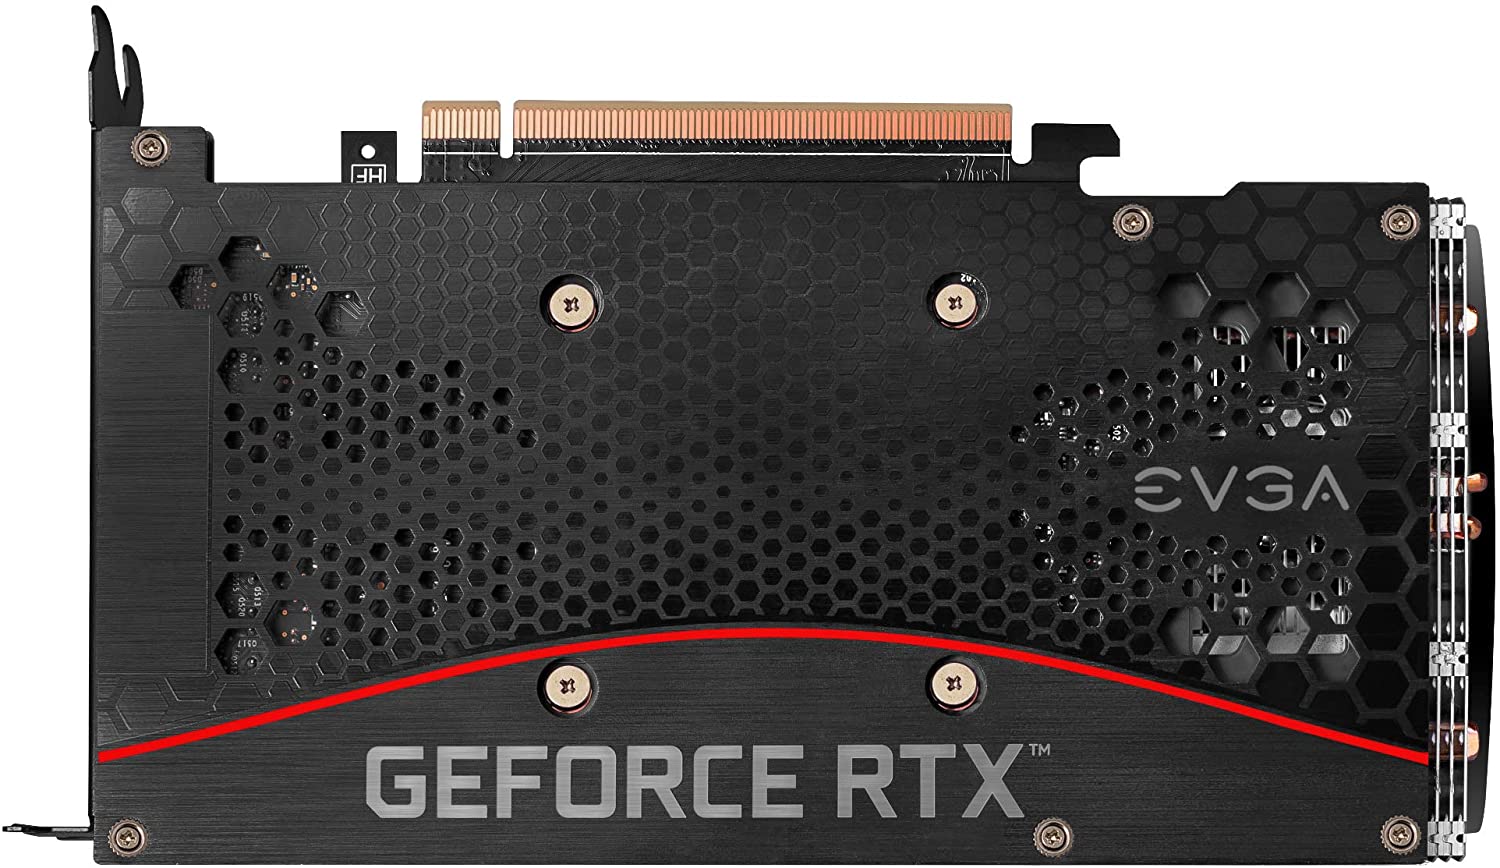 EVGA NVIDIA GeForce RTX 3060 XC Restock Spotted Selling Just $70 Past SRP| EVGA Cheaper than MSI?